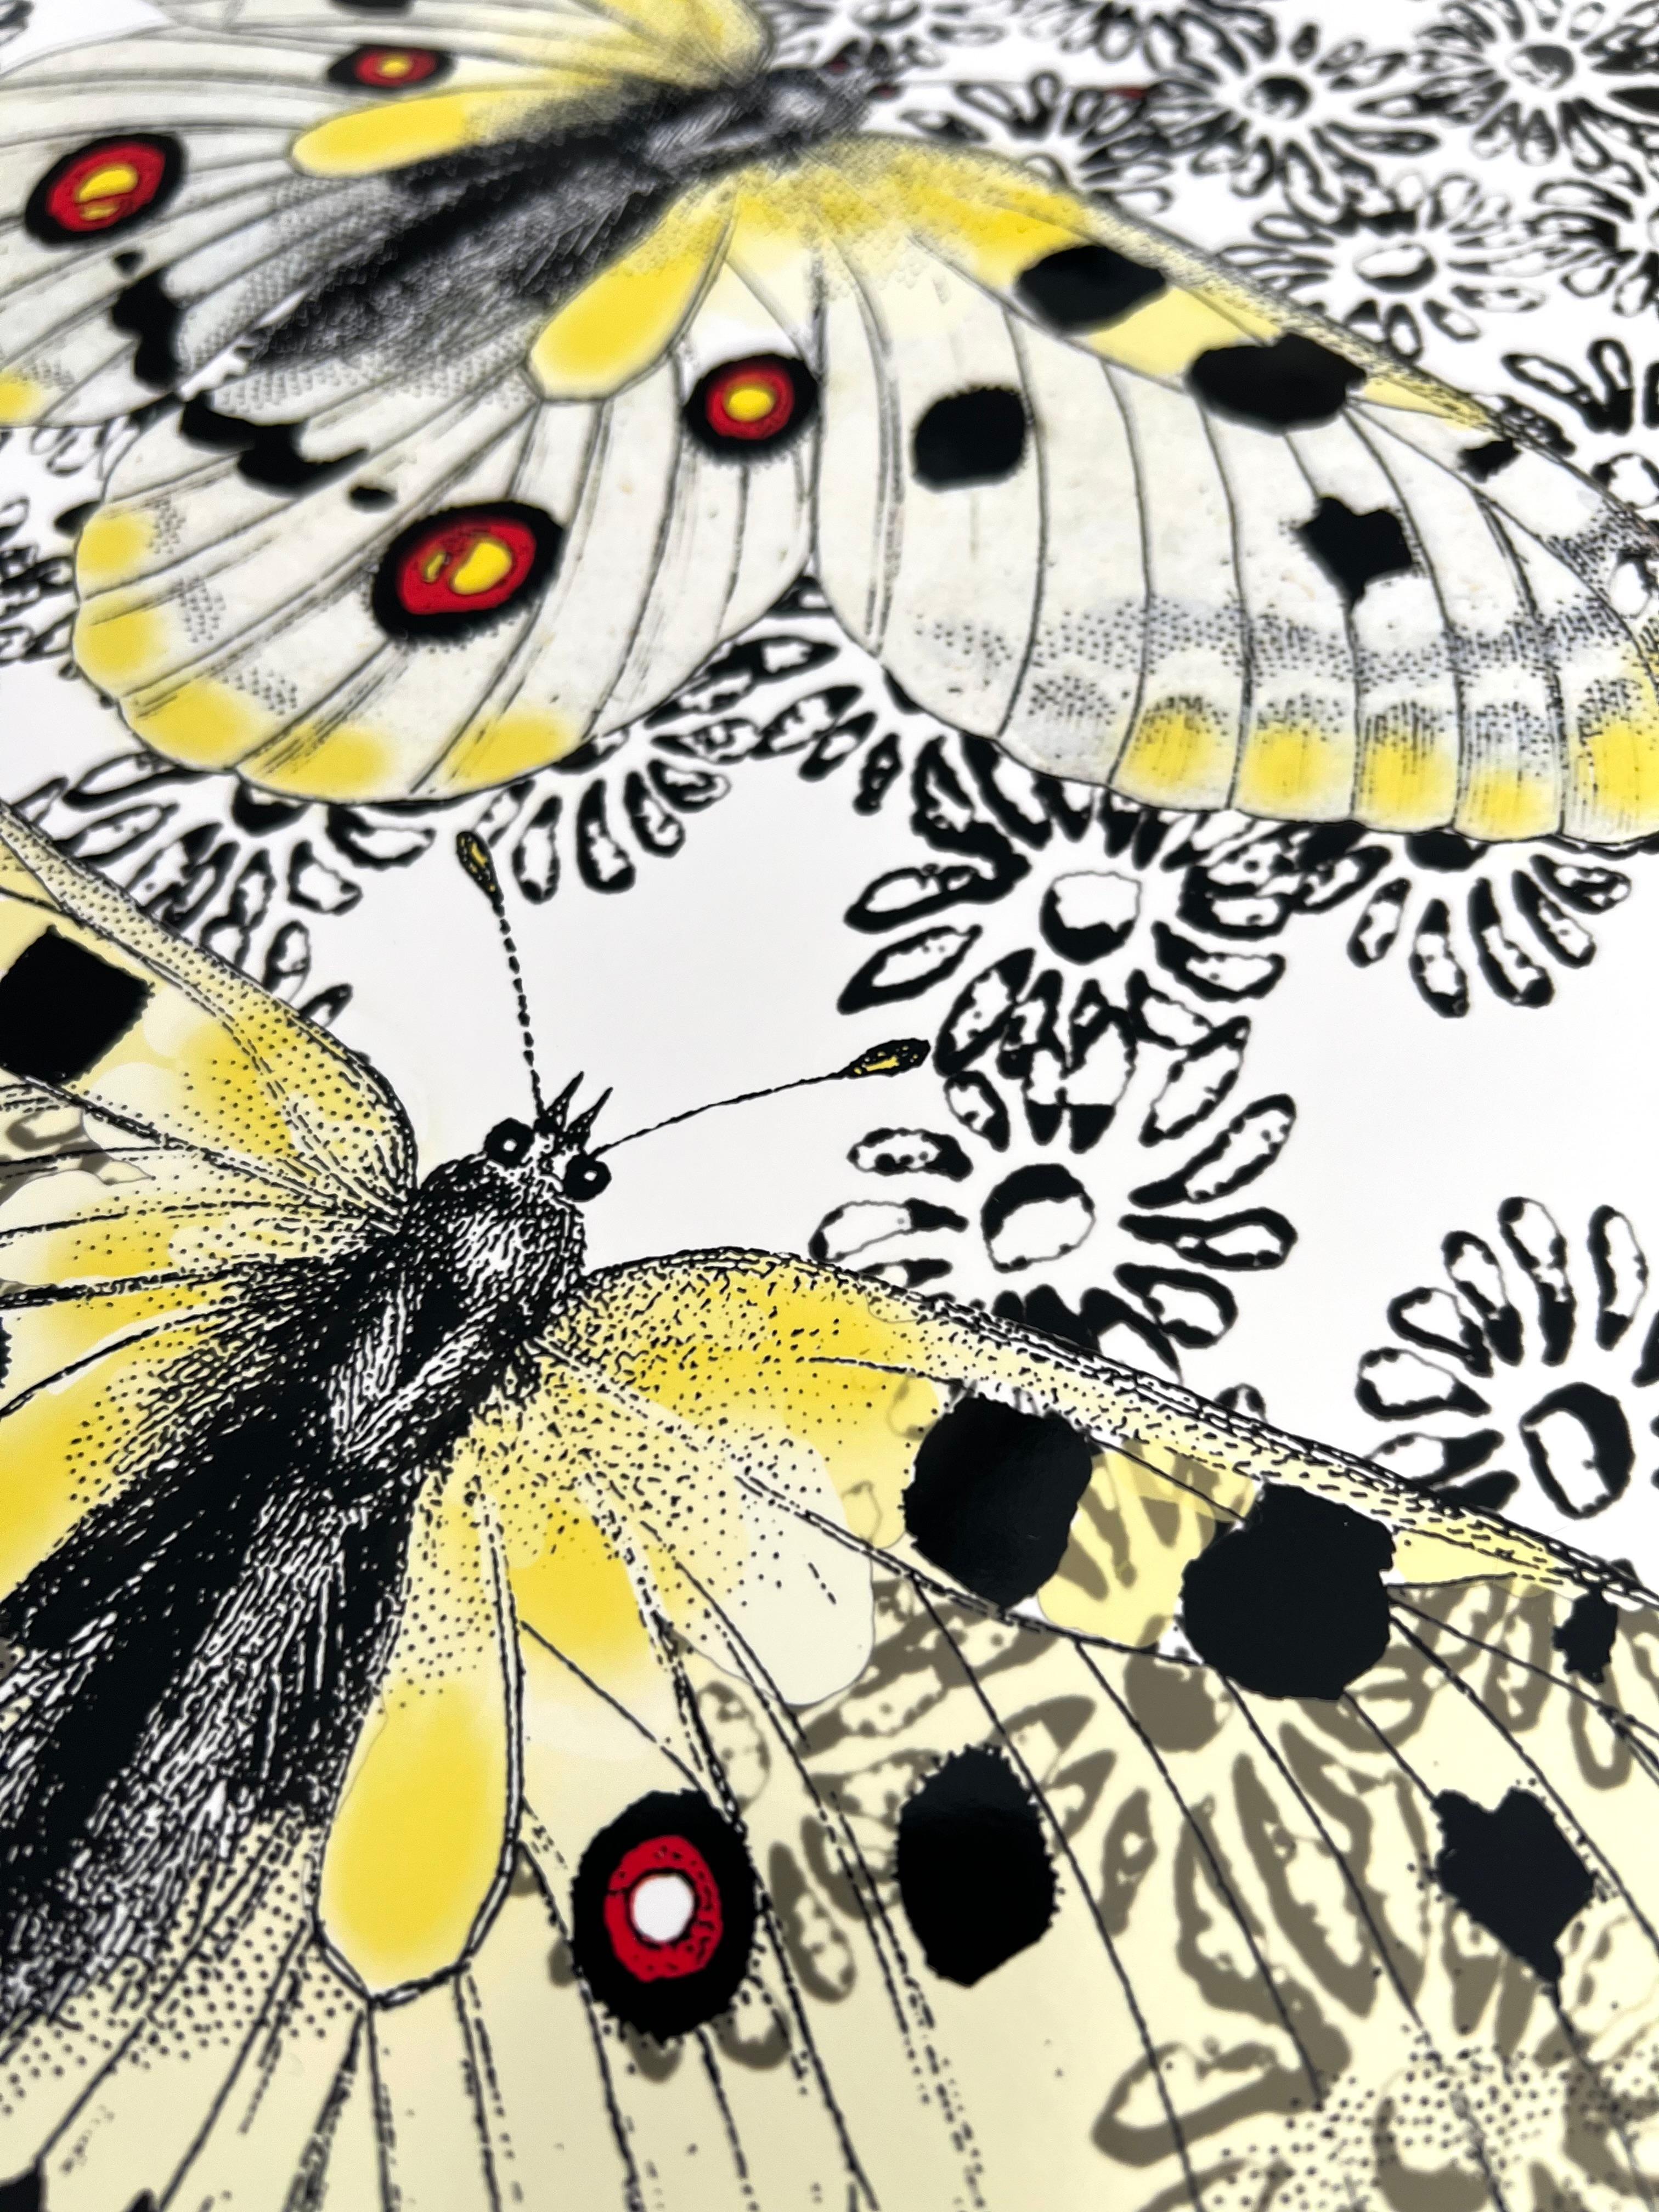 Butterflies and Daisies (Cut-out, Collage, Black & White, Patterns, Organic) - Modern Print by Louise Marler